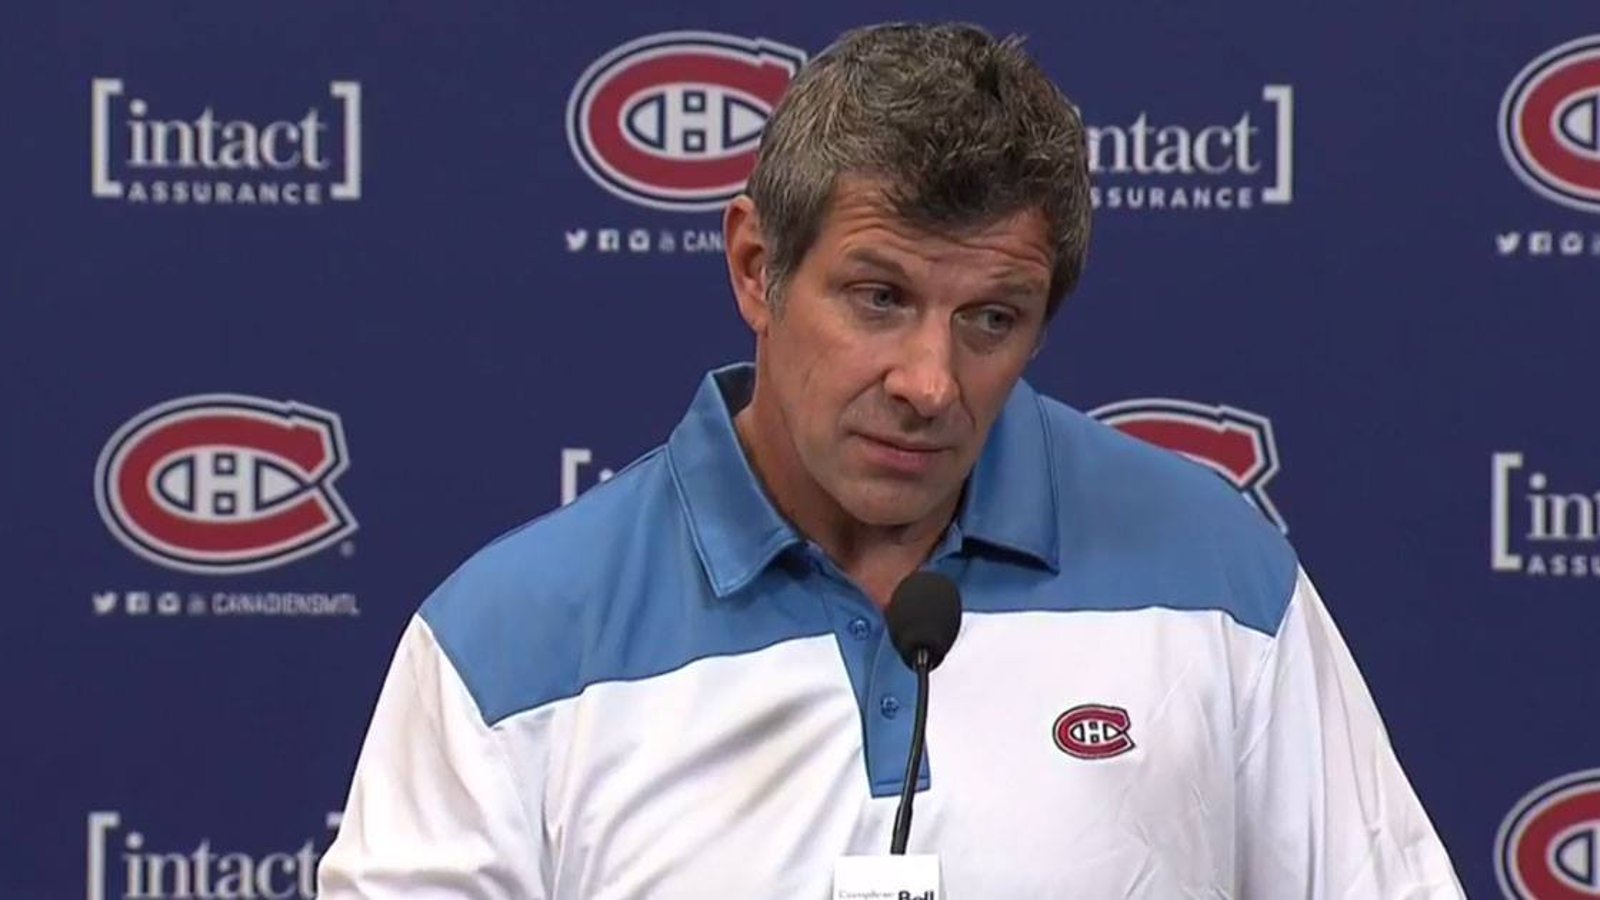 Toronto journalist gives the Canadiens flack over French answers during their press conference.